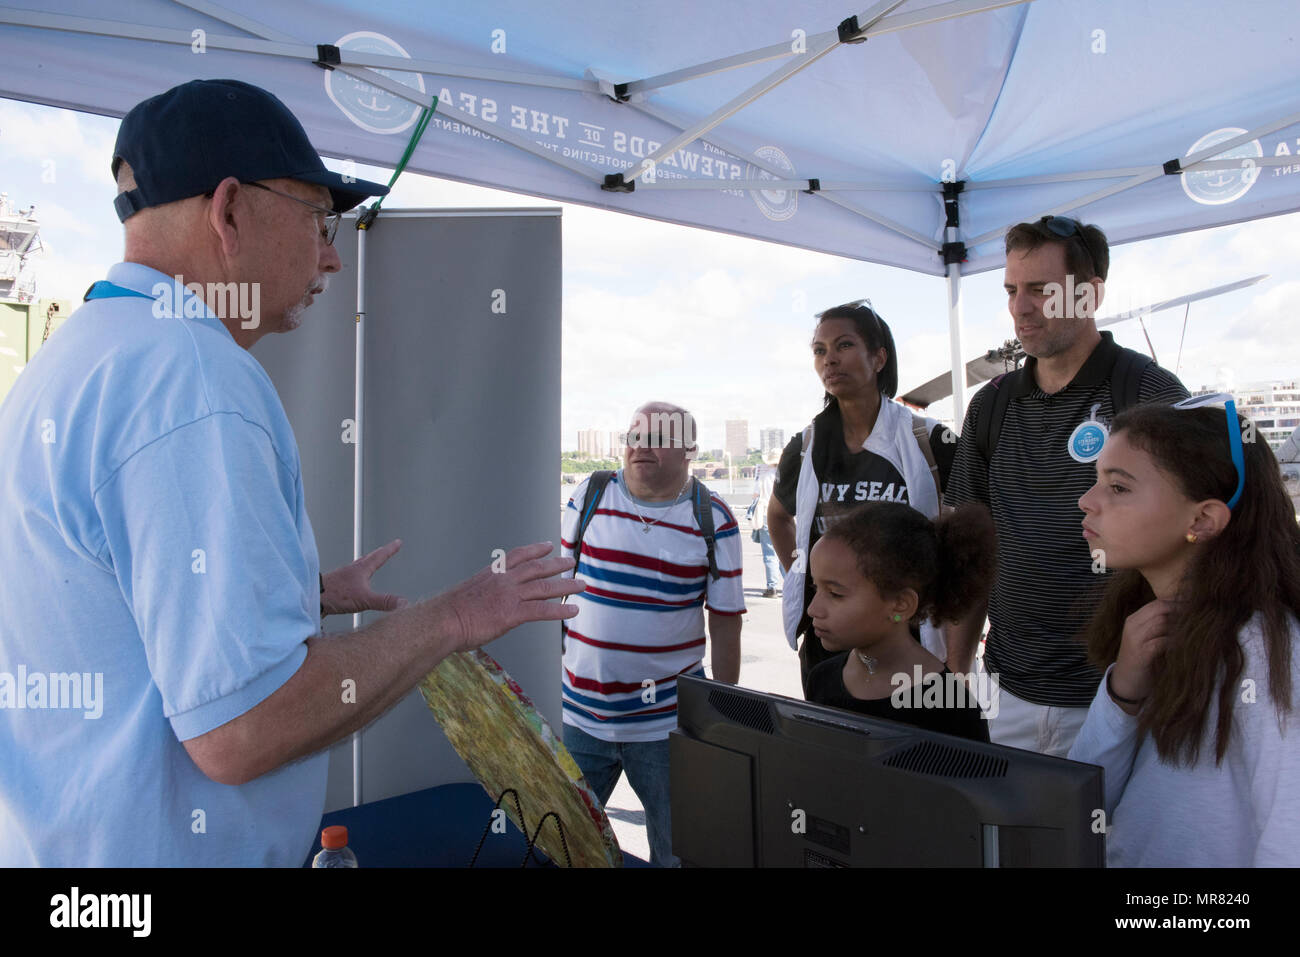 170527-N-MS174-002 NEW YORK (May 27, 2017) Ted Brown, left, an environmental public affairs officer with U.S. Fleet Forces Command, discusses shipboard plastic waste processing with Fox News host Harris Faulkner and her family at the U.S. Navy’s “Stewards of the Sea: Defending Freedom, Protecting the Environment” exhibit aboard the amphibious assault ship USS Kearsarge (LHD 3) during Fleet Week New York.  The Navy employs every means available to mitigate the potential environmental effects of our activities without jeopardizing the safety of our Sailors or impacting our Navy readiness mission Stock Photo